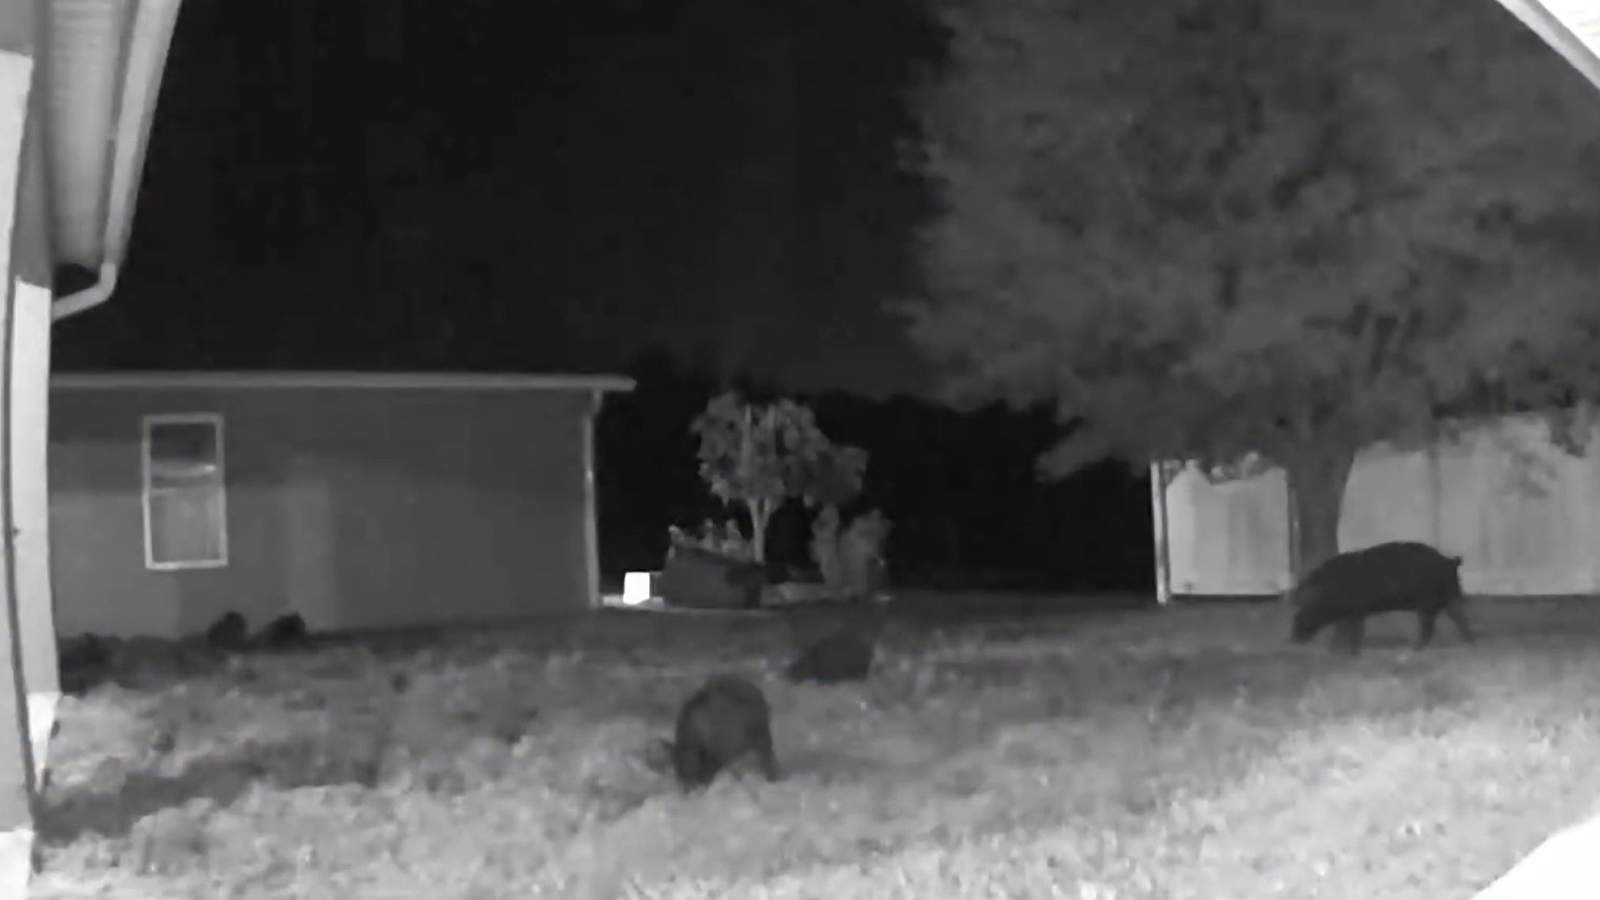 Wildlife officials tell Florida man to shoot or trap wild boars tearing up his yard